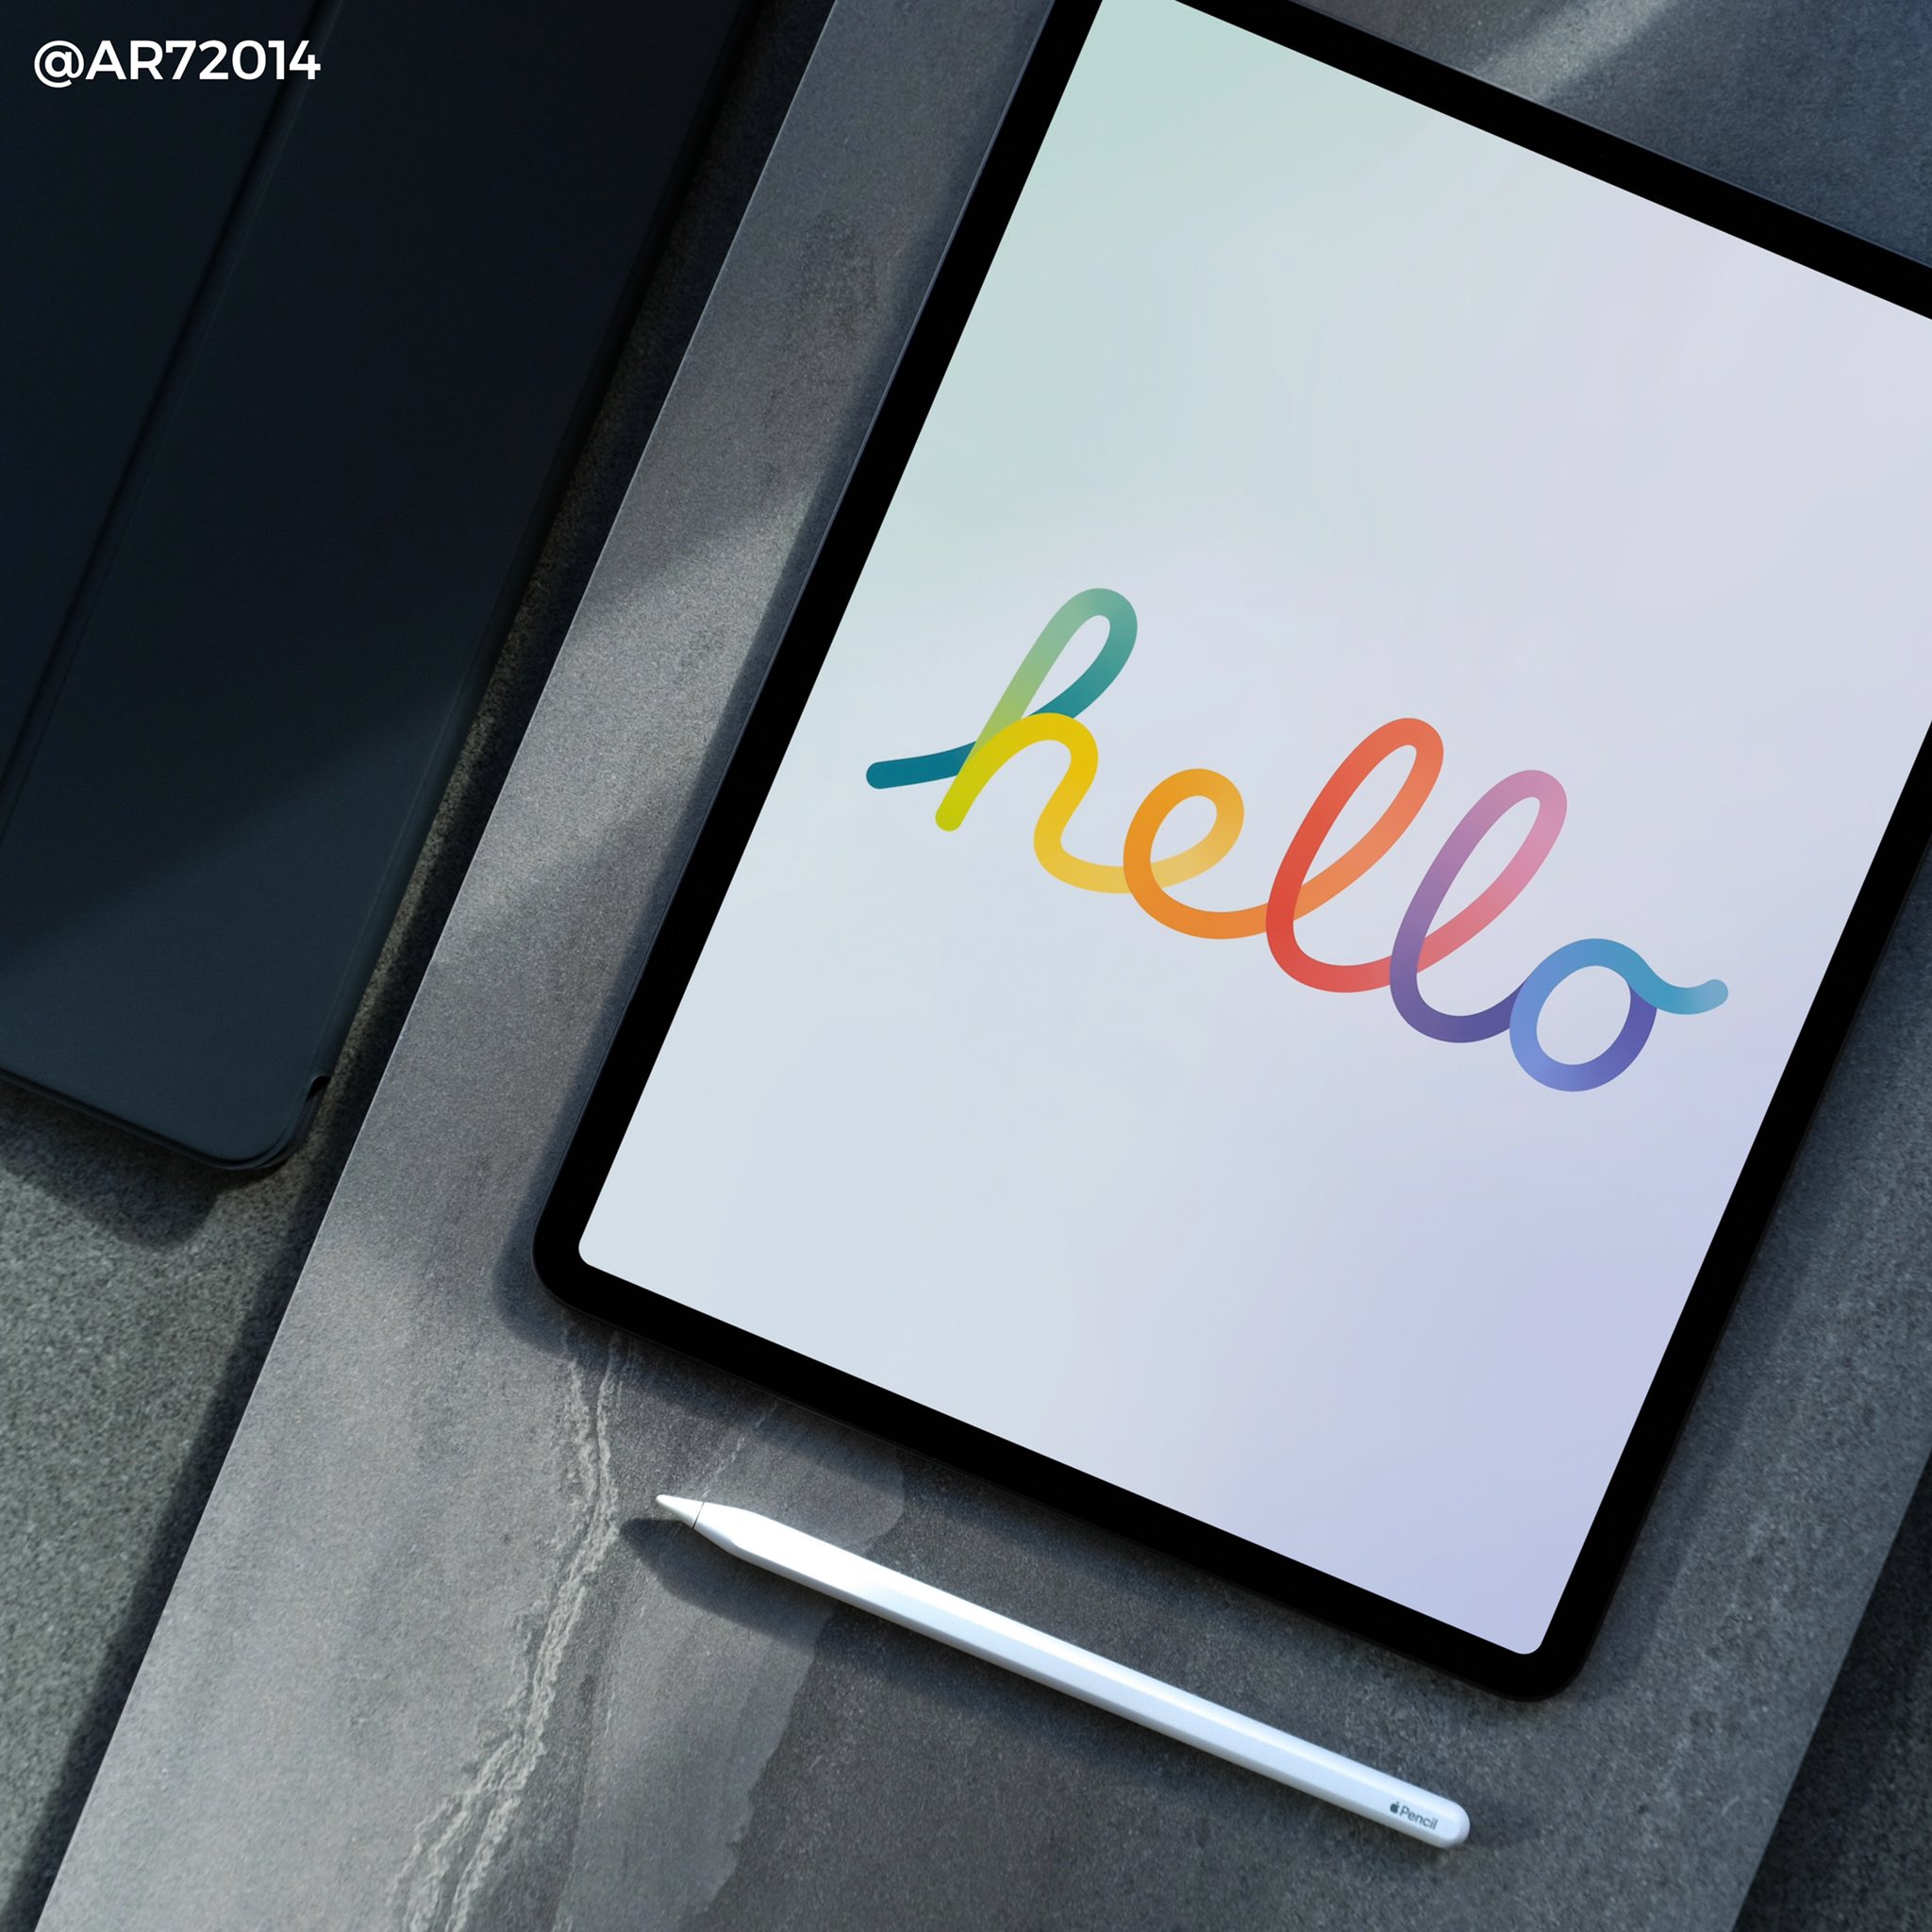 Download M1 Mac Hello Wallpapers For Iphone Ipad And Mac Here Ios Hacker